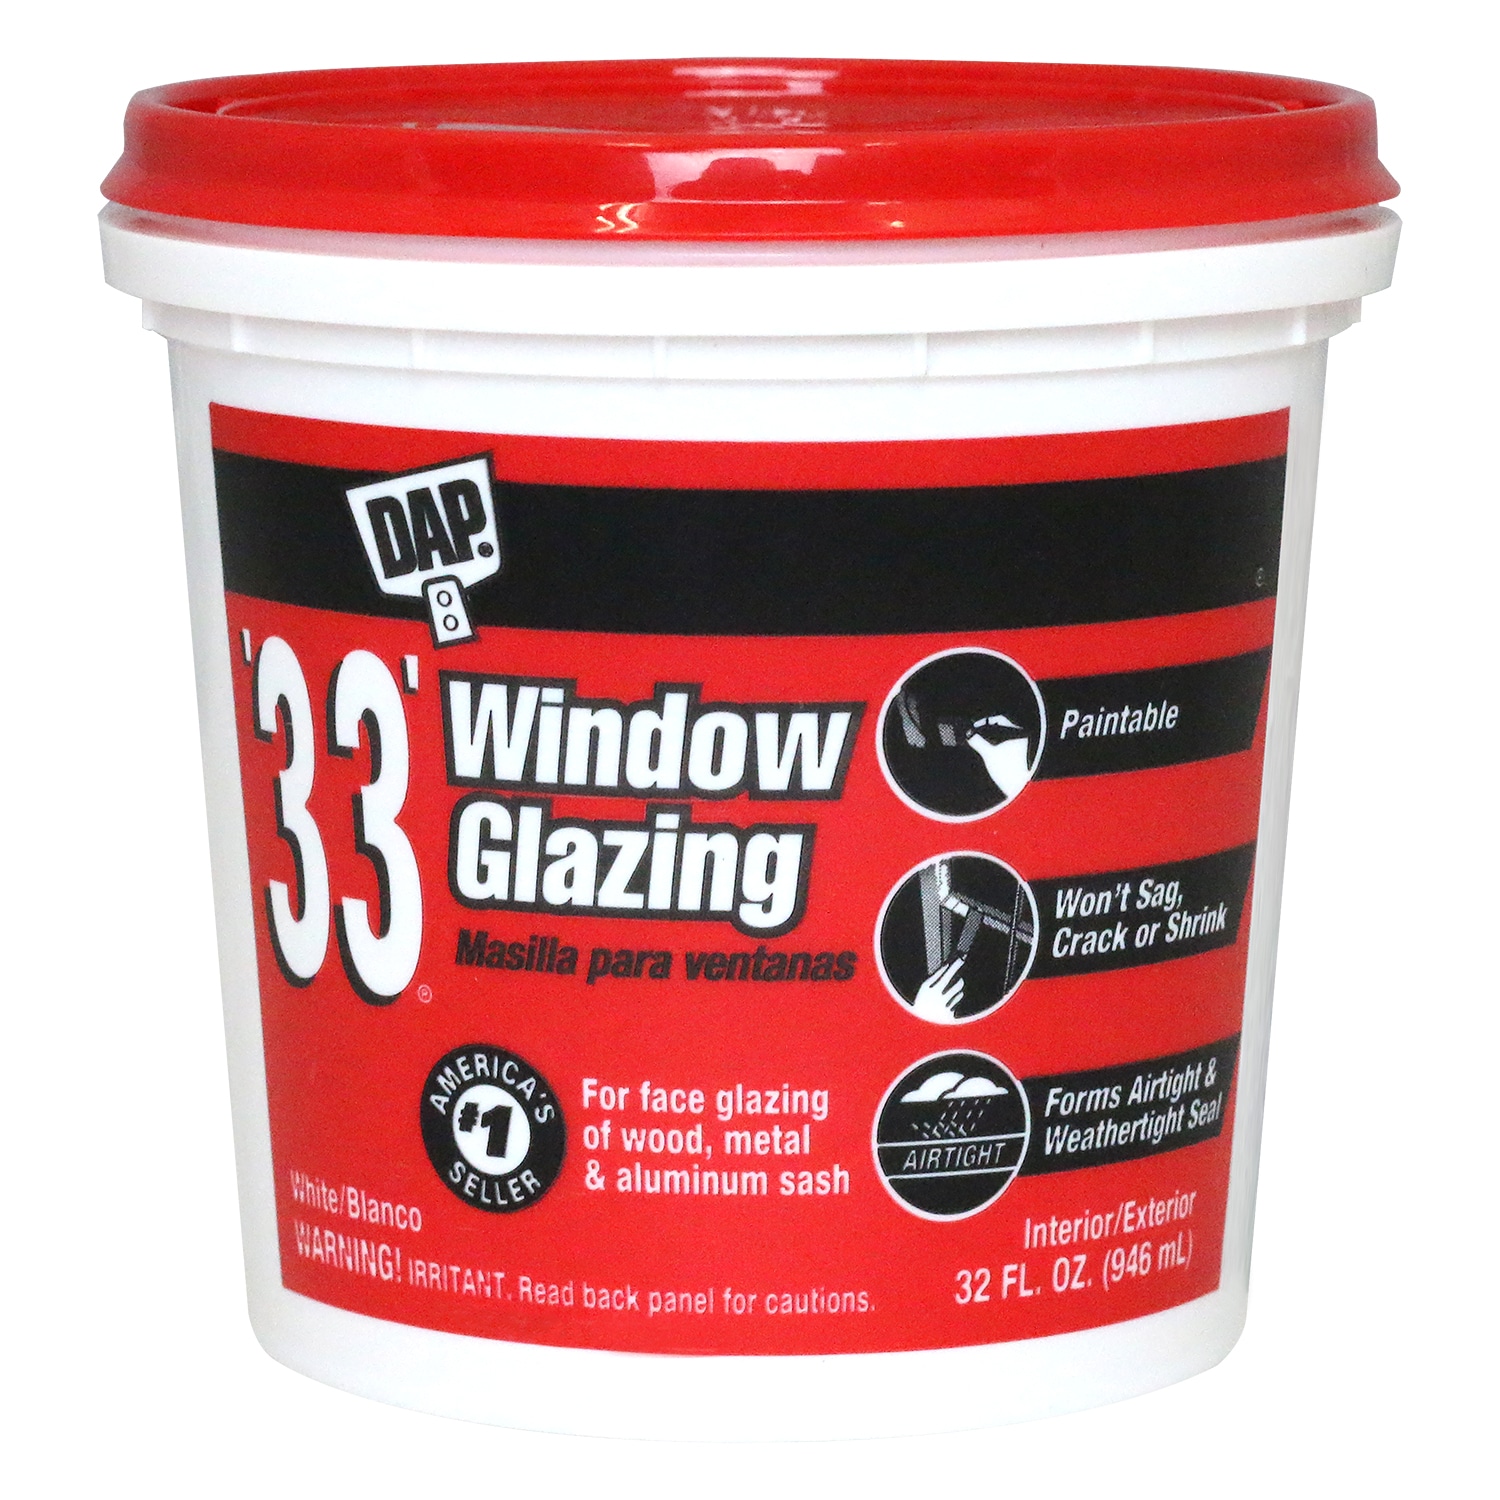 How to Glaze a Window (Tips from a Pro)